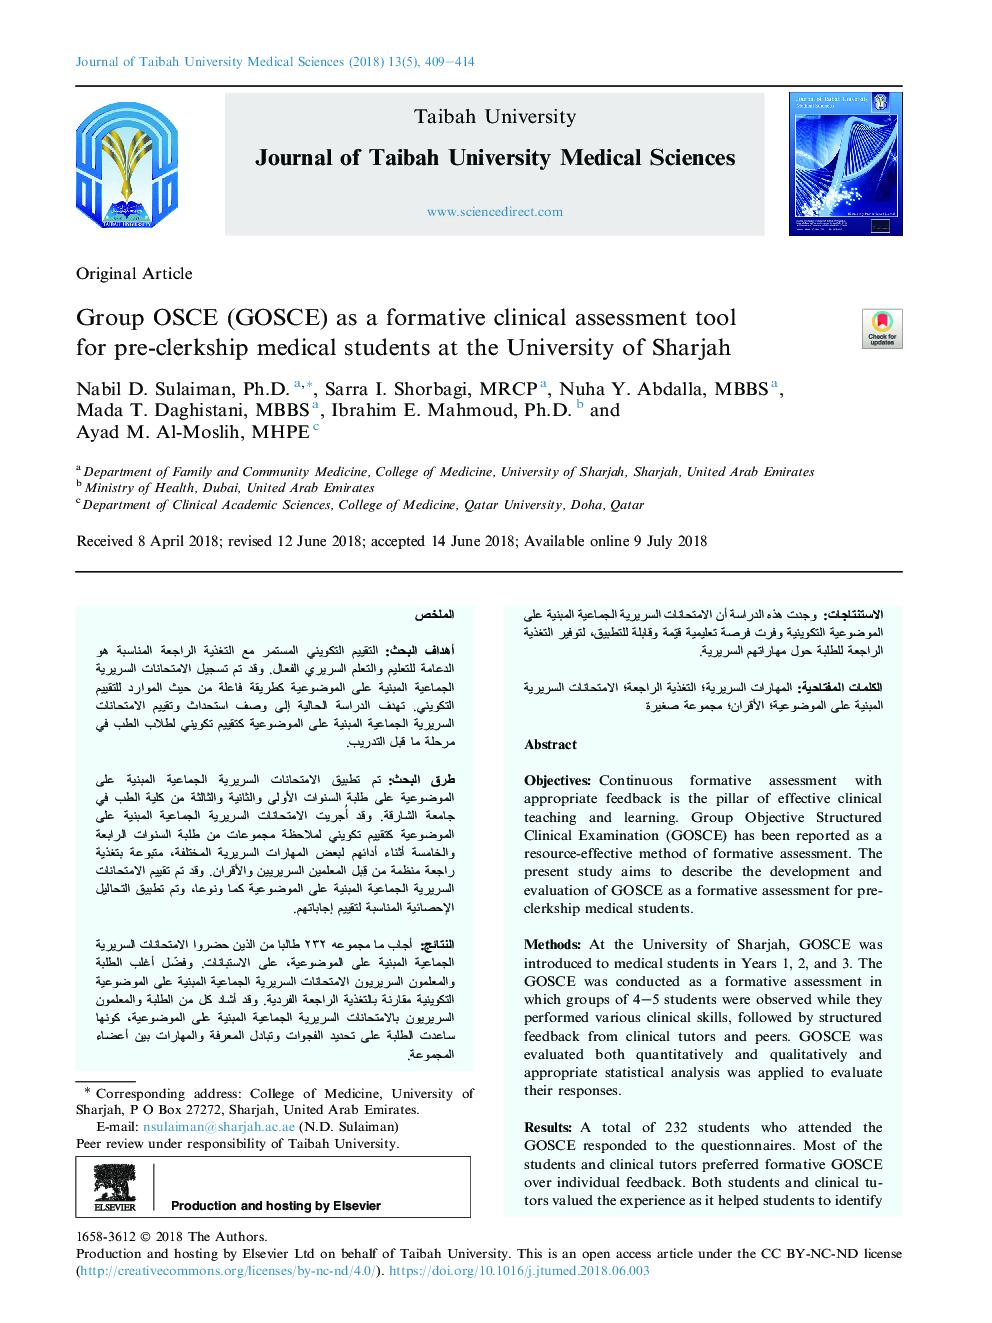 Group OSCE (GOSCE) as a formative clinical assessment tool forÂ pre-clerkship medical students at the University of Sharjah